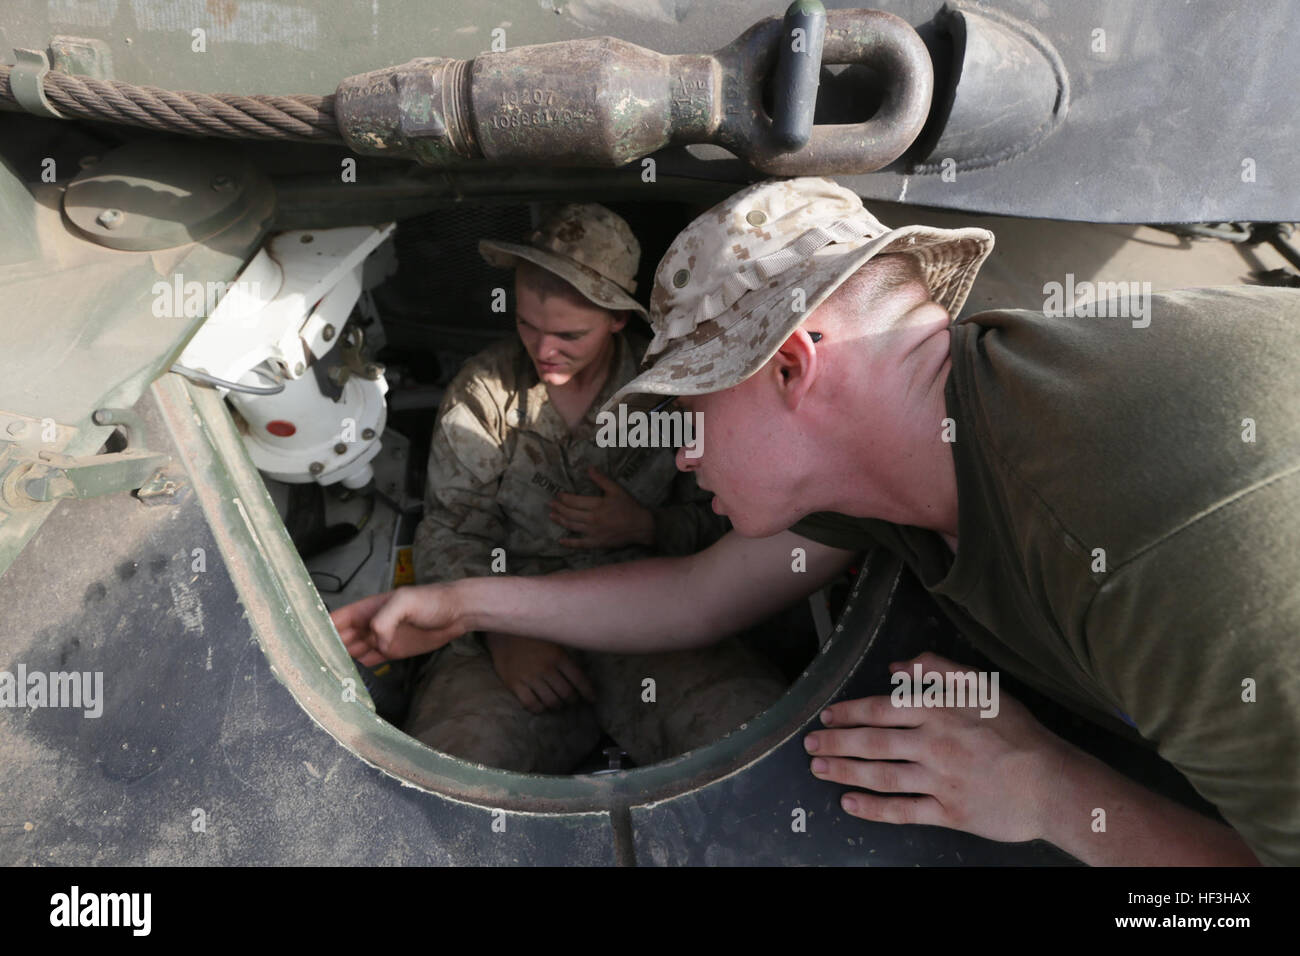 ARTA BEACH, Djibouti (July 24, 2015)  U.S. Marine Lance Cpl. Paul Shabel, right, shows Lance Cpl. Jacob Bowen, left, the driver controls of an M1A1 Abrams tank. Shabel is a tank driver with Battalion Landing Team 3rd Battalion, 1st Marine Regiment, 15th Marine Expeditionary Unit, and Bowen is a rifleman with BLT 3/1, 15th MEU. Elements of the 15th Marine Expeditionary Unit are ashore in Djibouti for sustainment training to maintain and enhance the skills they developed during their pre-deployment training period.  The 15th MEU is currently deployed in support of maritime security operations an Stock Photo